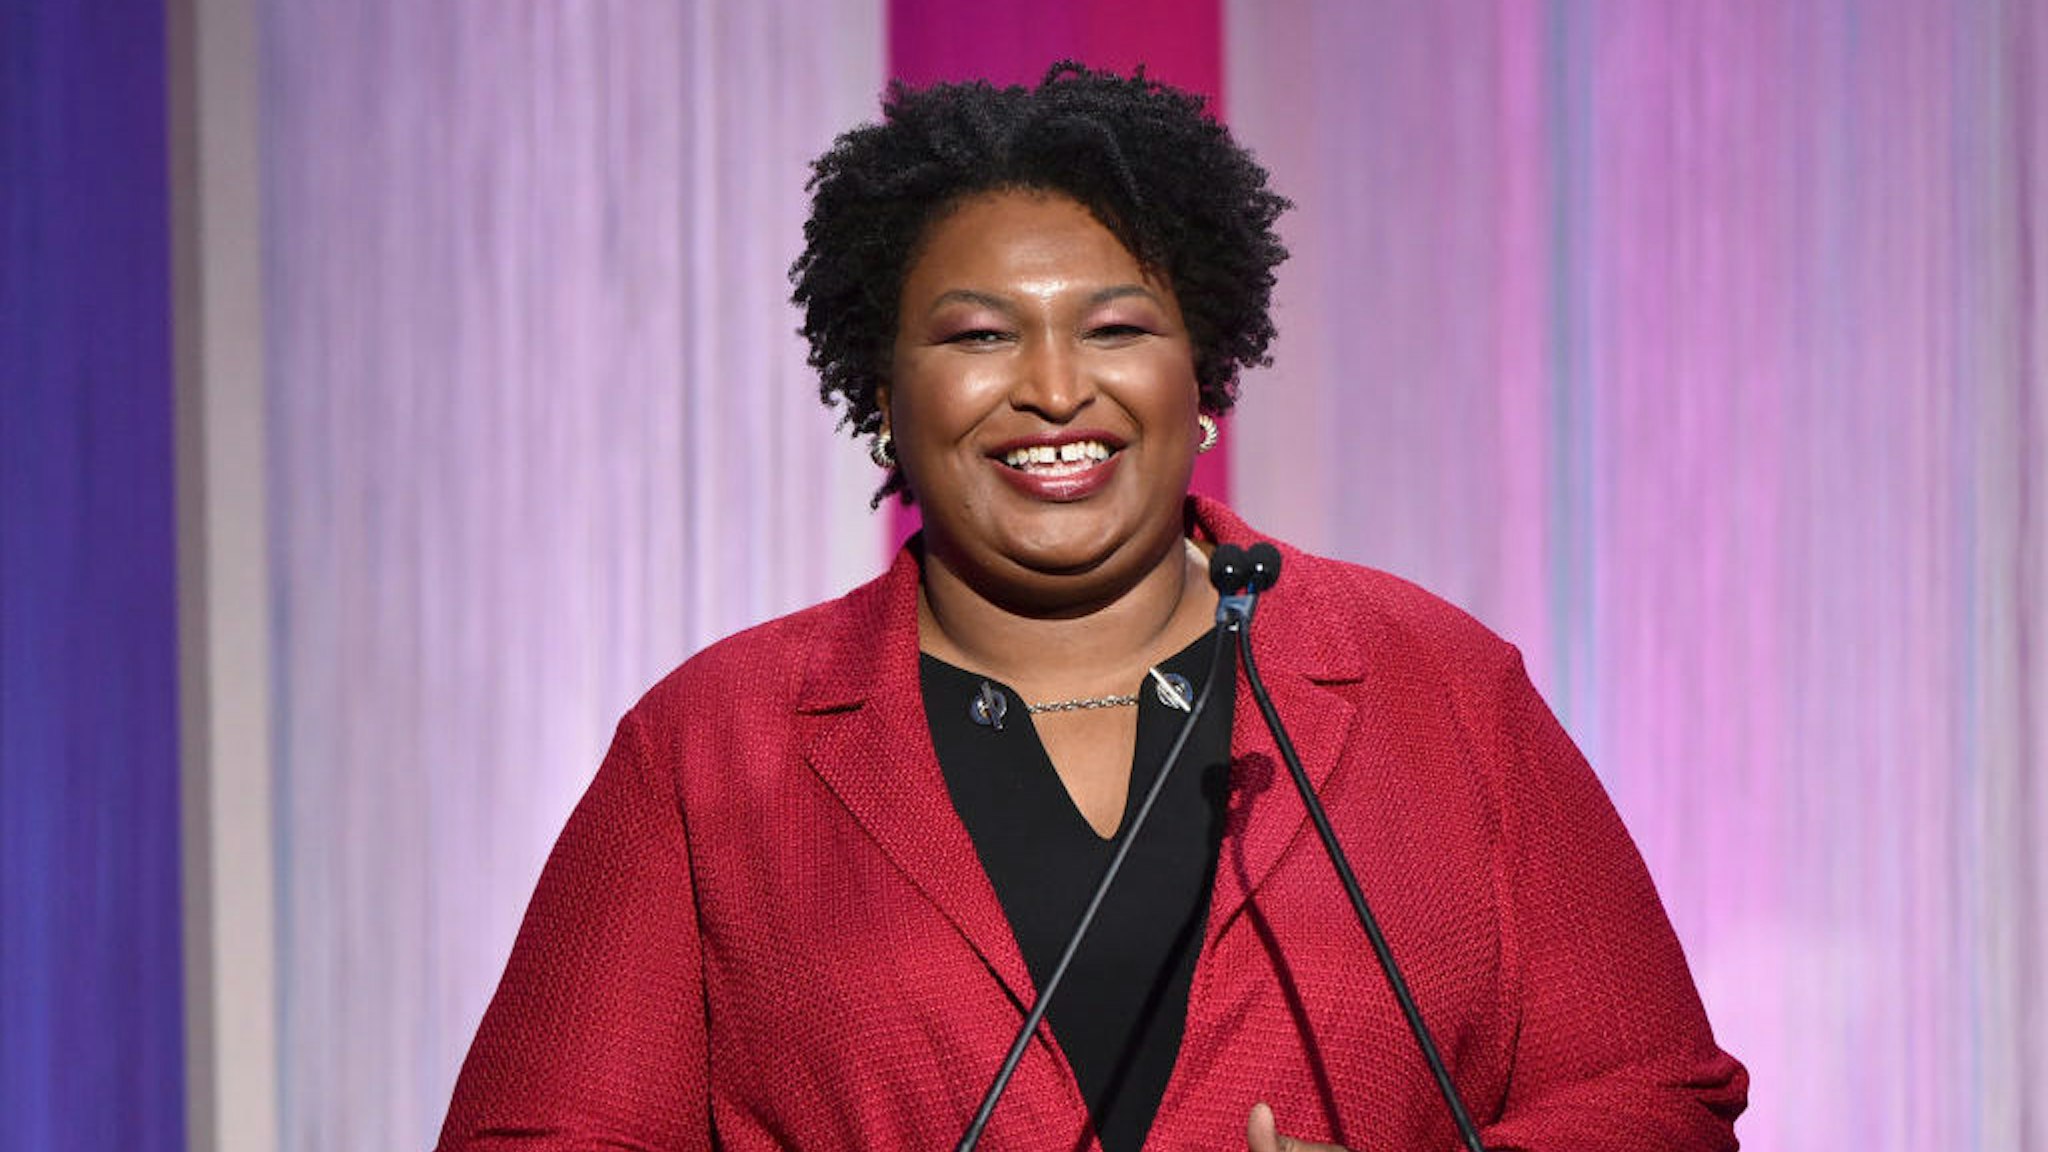 HOLLYWOOD, CALIFORNIA - DECEMBER 11: Politician Stacey Abrams speaks onstage during The Hollywood Reporter's Power 100 Women in Entertainment at Milk Studios on December 11, 2019 in Hollywood, California. (Photo by Alberto E. Rodriguez/Getty Images for The Hollywood Reporter)